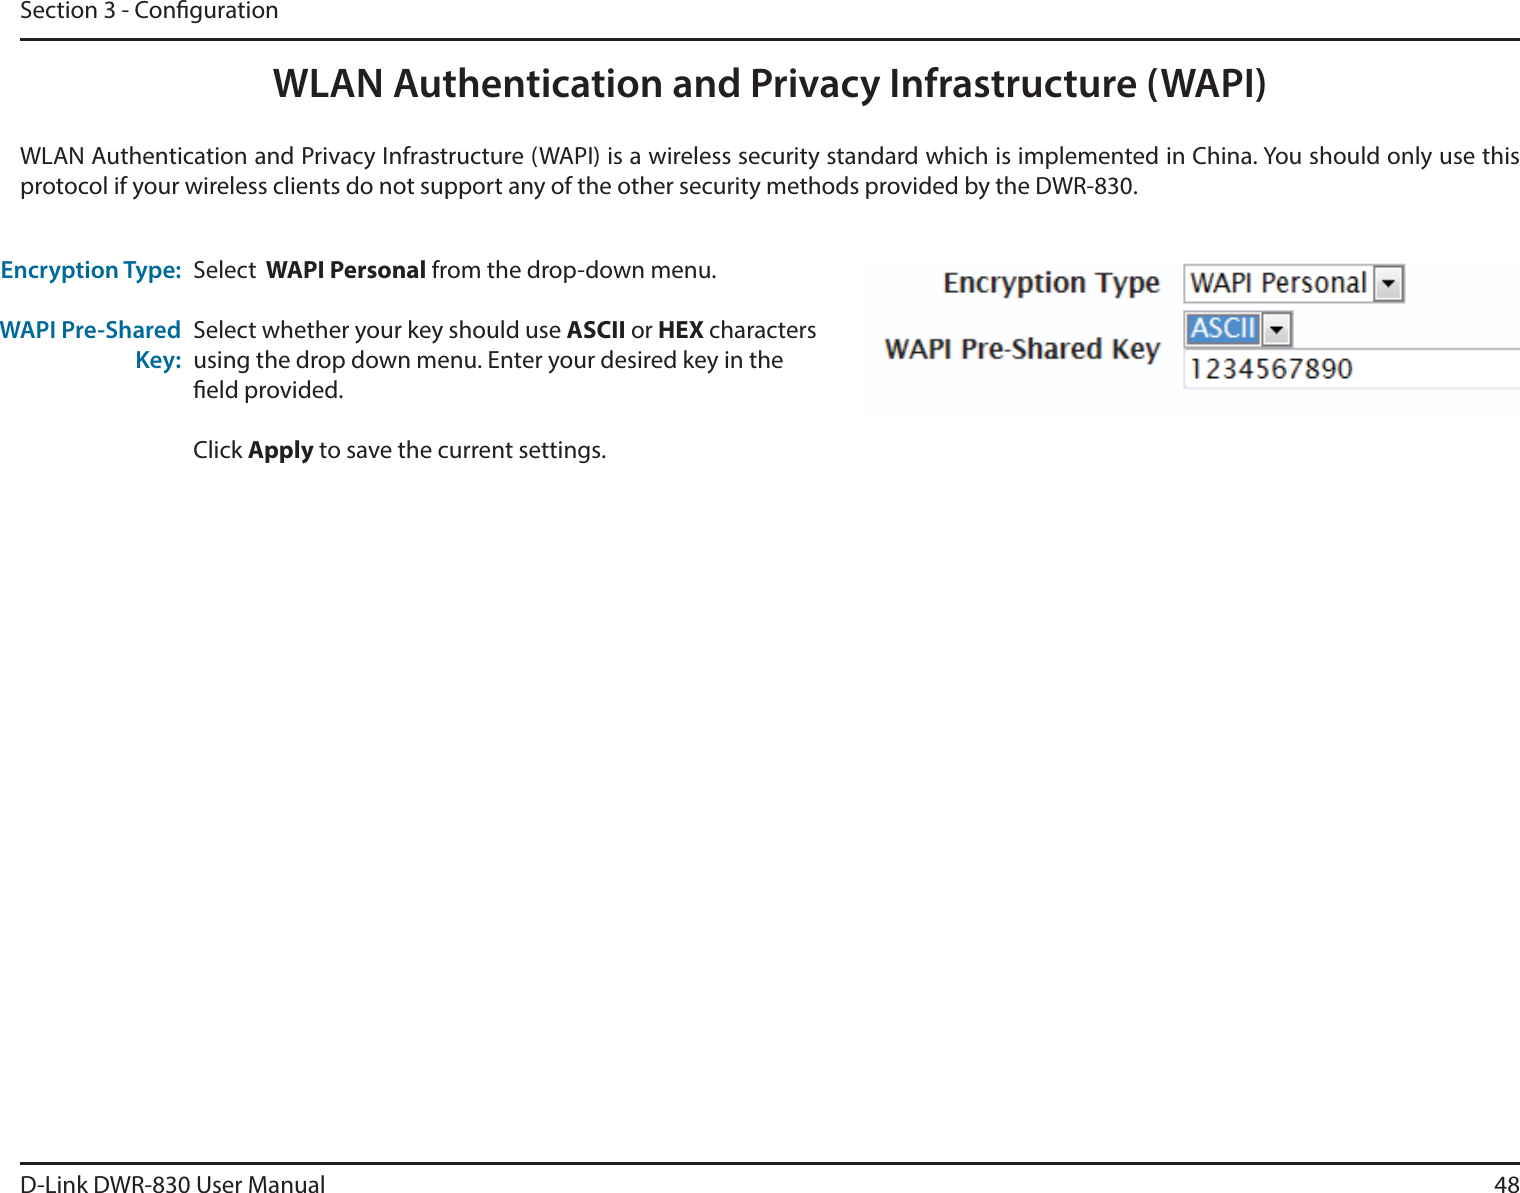 D-Link DWR-830 User Manualprotocol if your wireless clients do not support any of the other security methods provided by the DWR-830.48Section 3 - CongurationWLAN Authentication and Privacy Infrastructure (WAPI)WLAN Authentication and Privacy Infrastructure (WAPI) is a wireless security standard which is implemented in China. You should only use this Encryption Type:WAPI Pre-Shared Key:Select  WAPI Personal from the drop-down menu. Select whether your key should use ASCII or HEX characters using the drop down menu. Enter your desired key in the eld provided. Click Apply to save the current settings. 